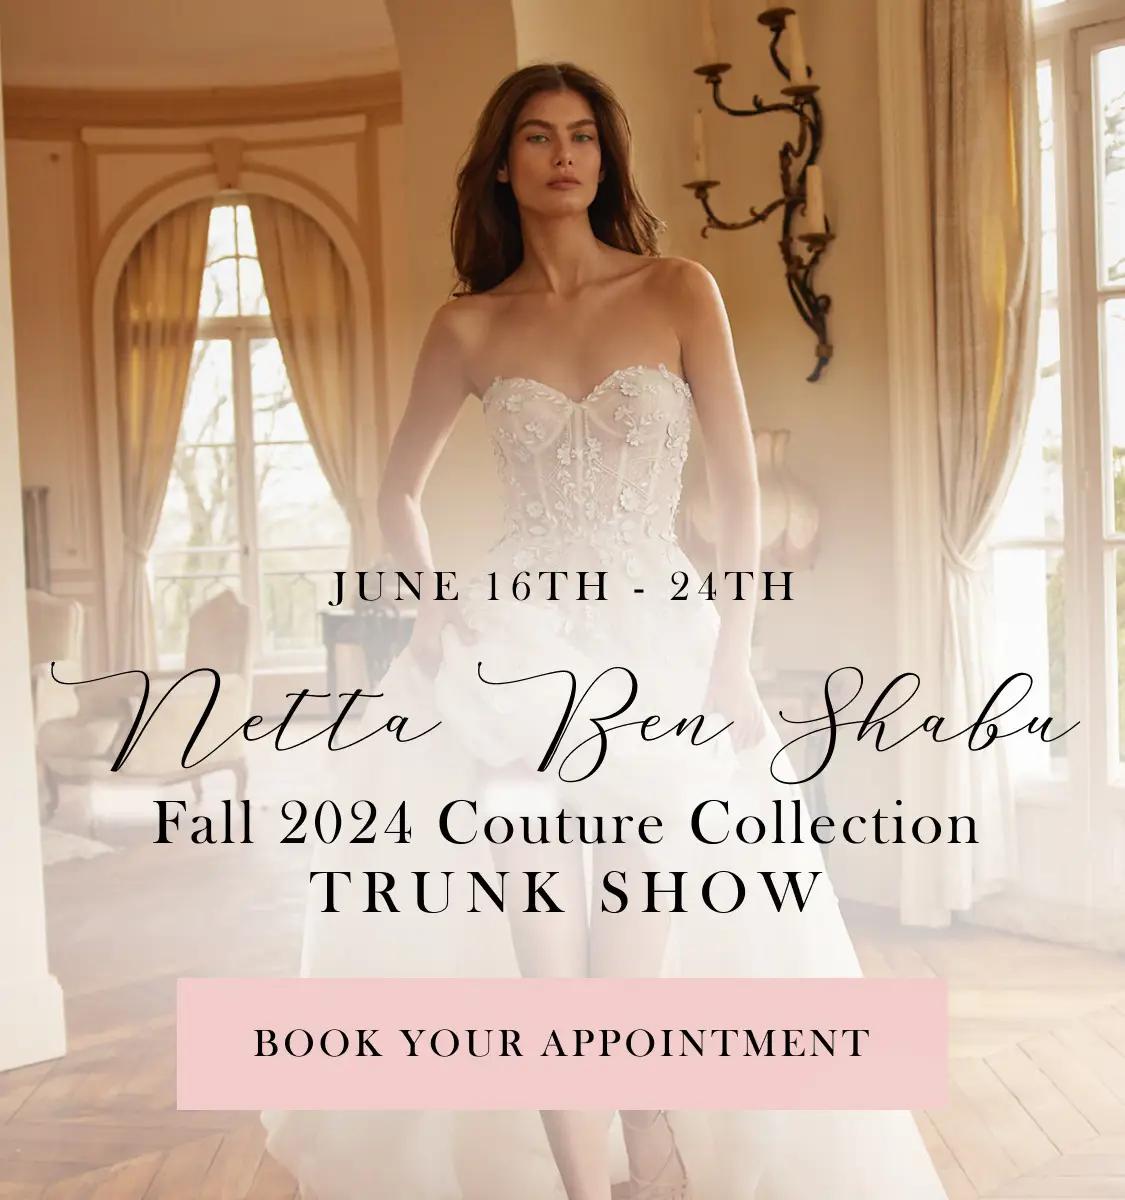 Netta Ben Shabu - Fall 2024 Couture Collection Trunk Show Banner Mobile